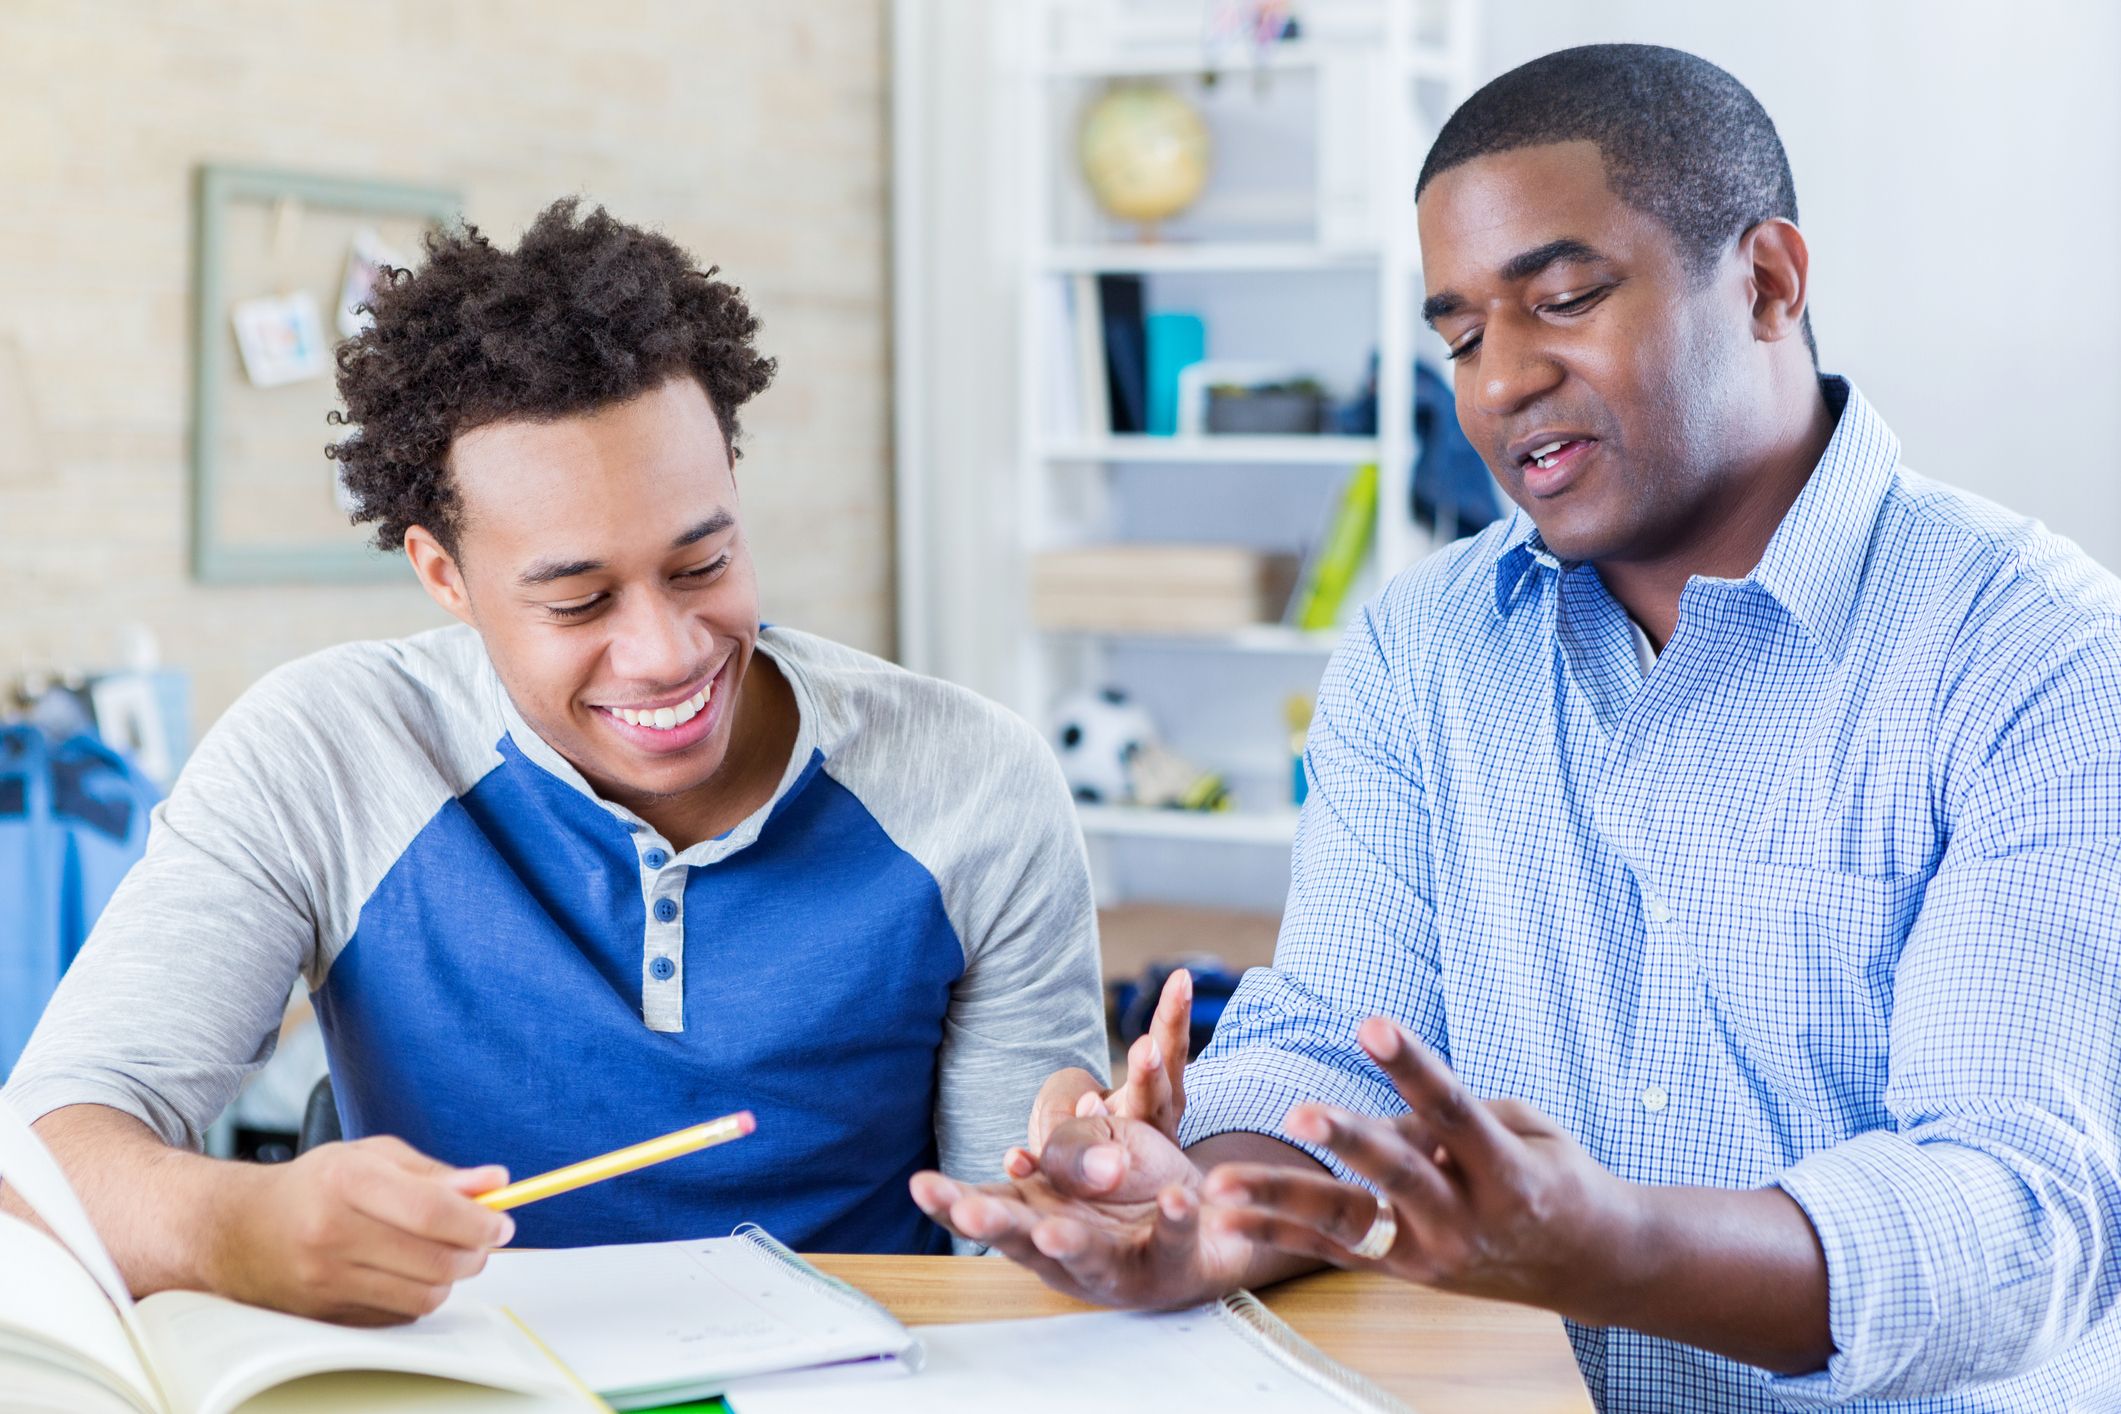 7 Tutoring Tips to Try with Your Student